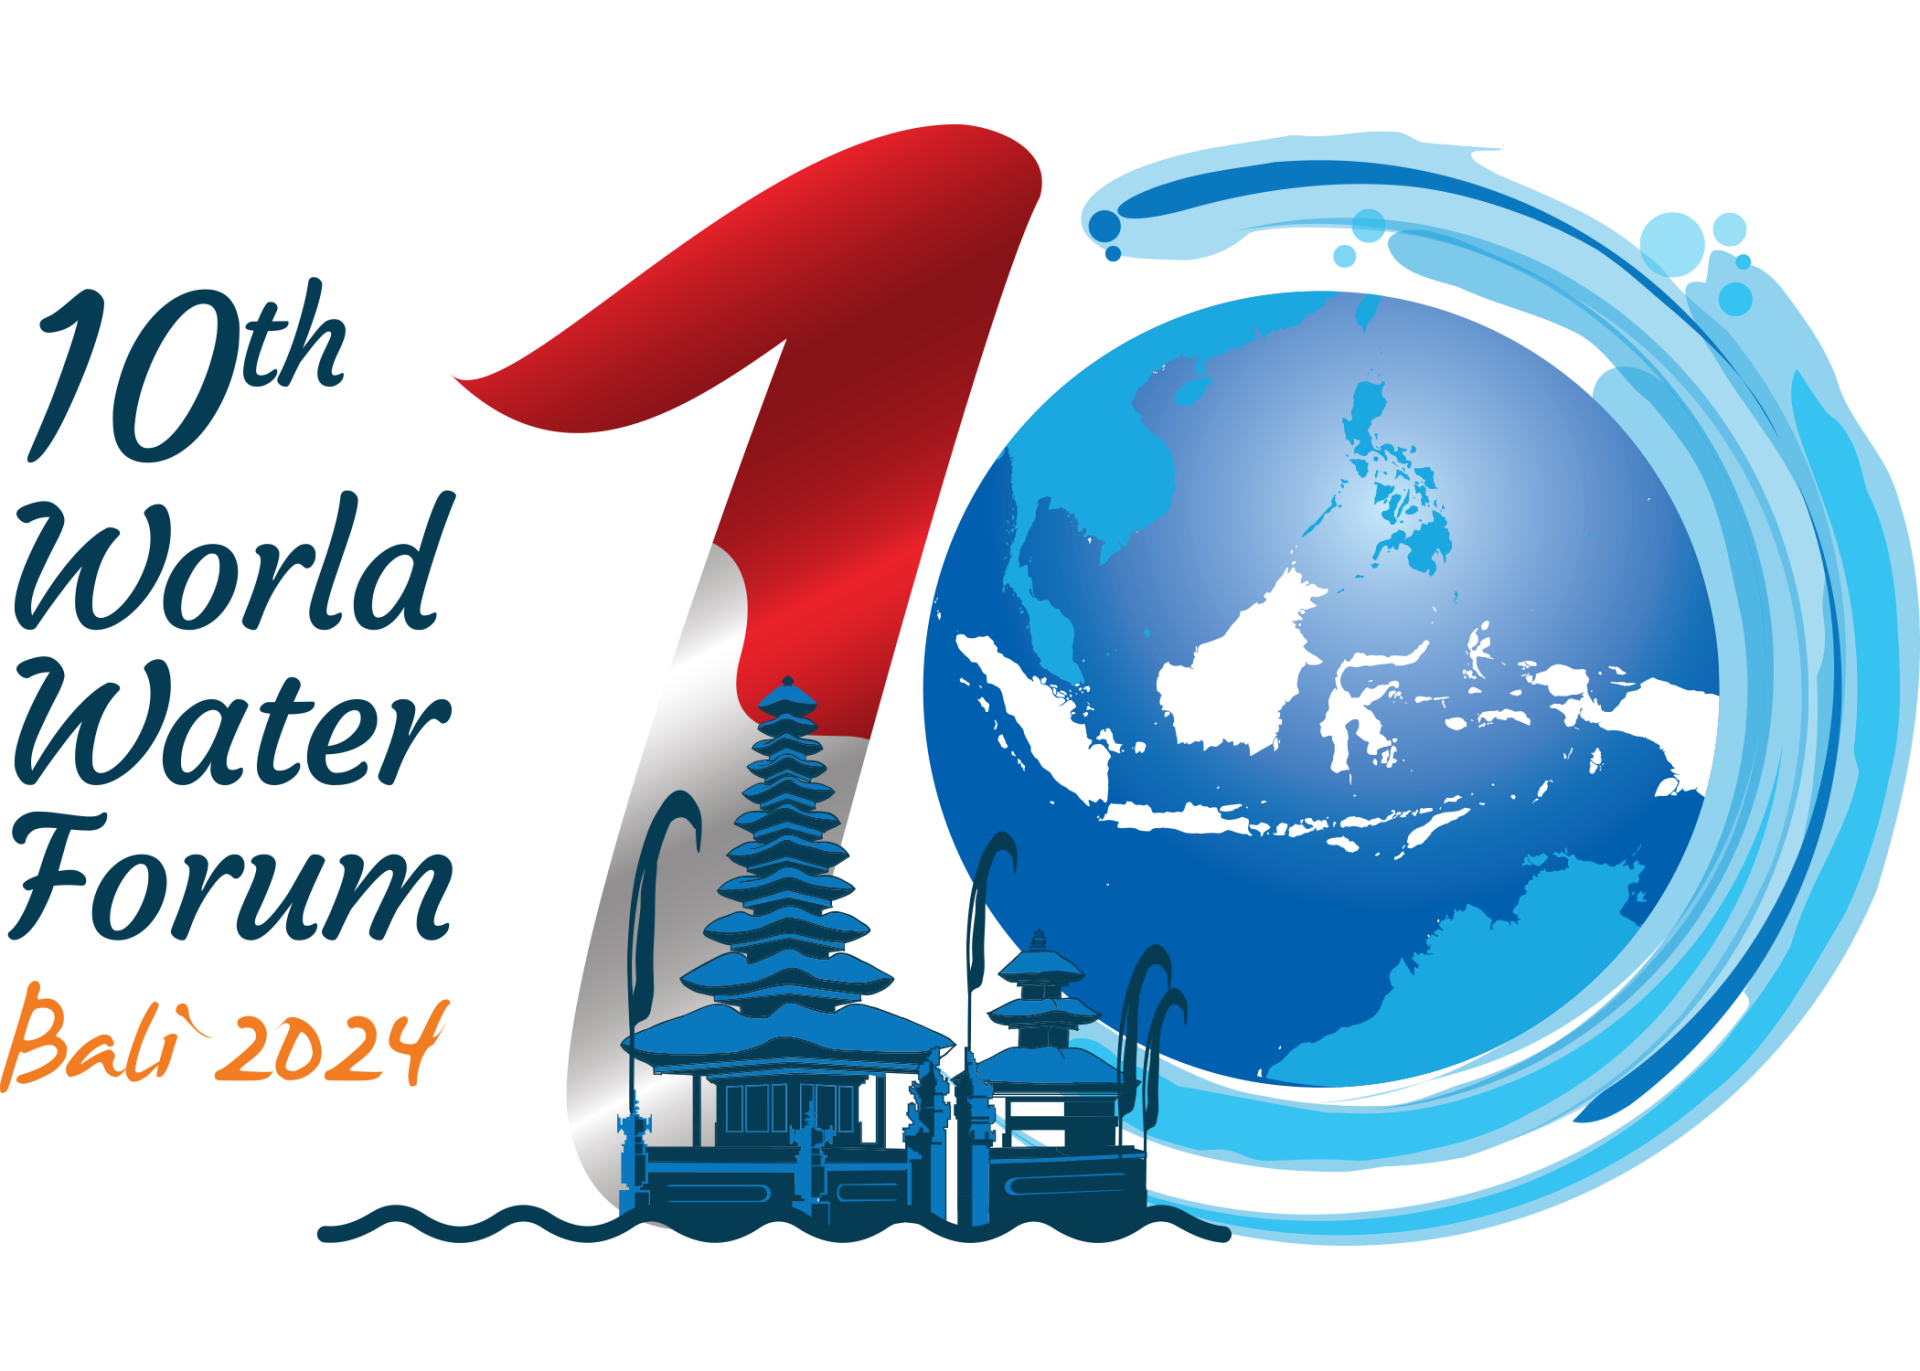 Invitation to the 10th World Water Forum